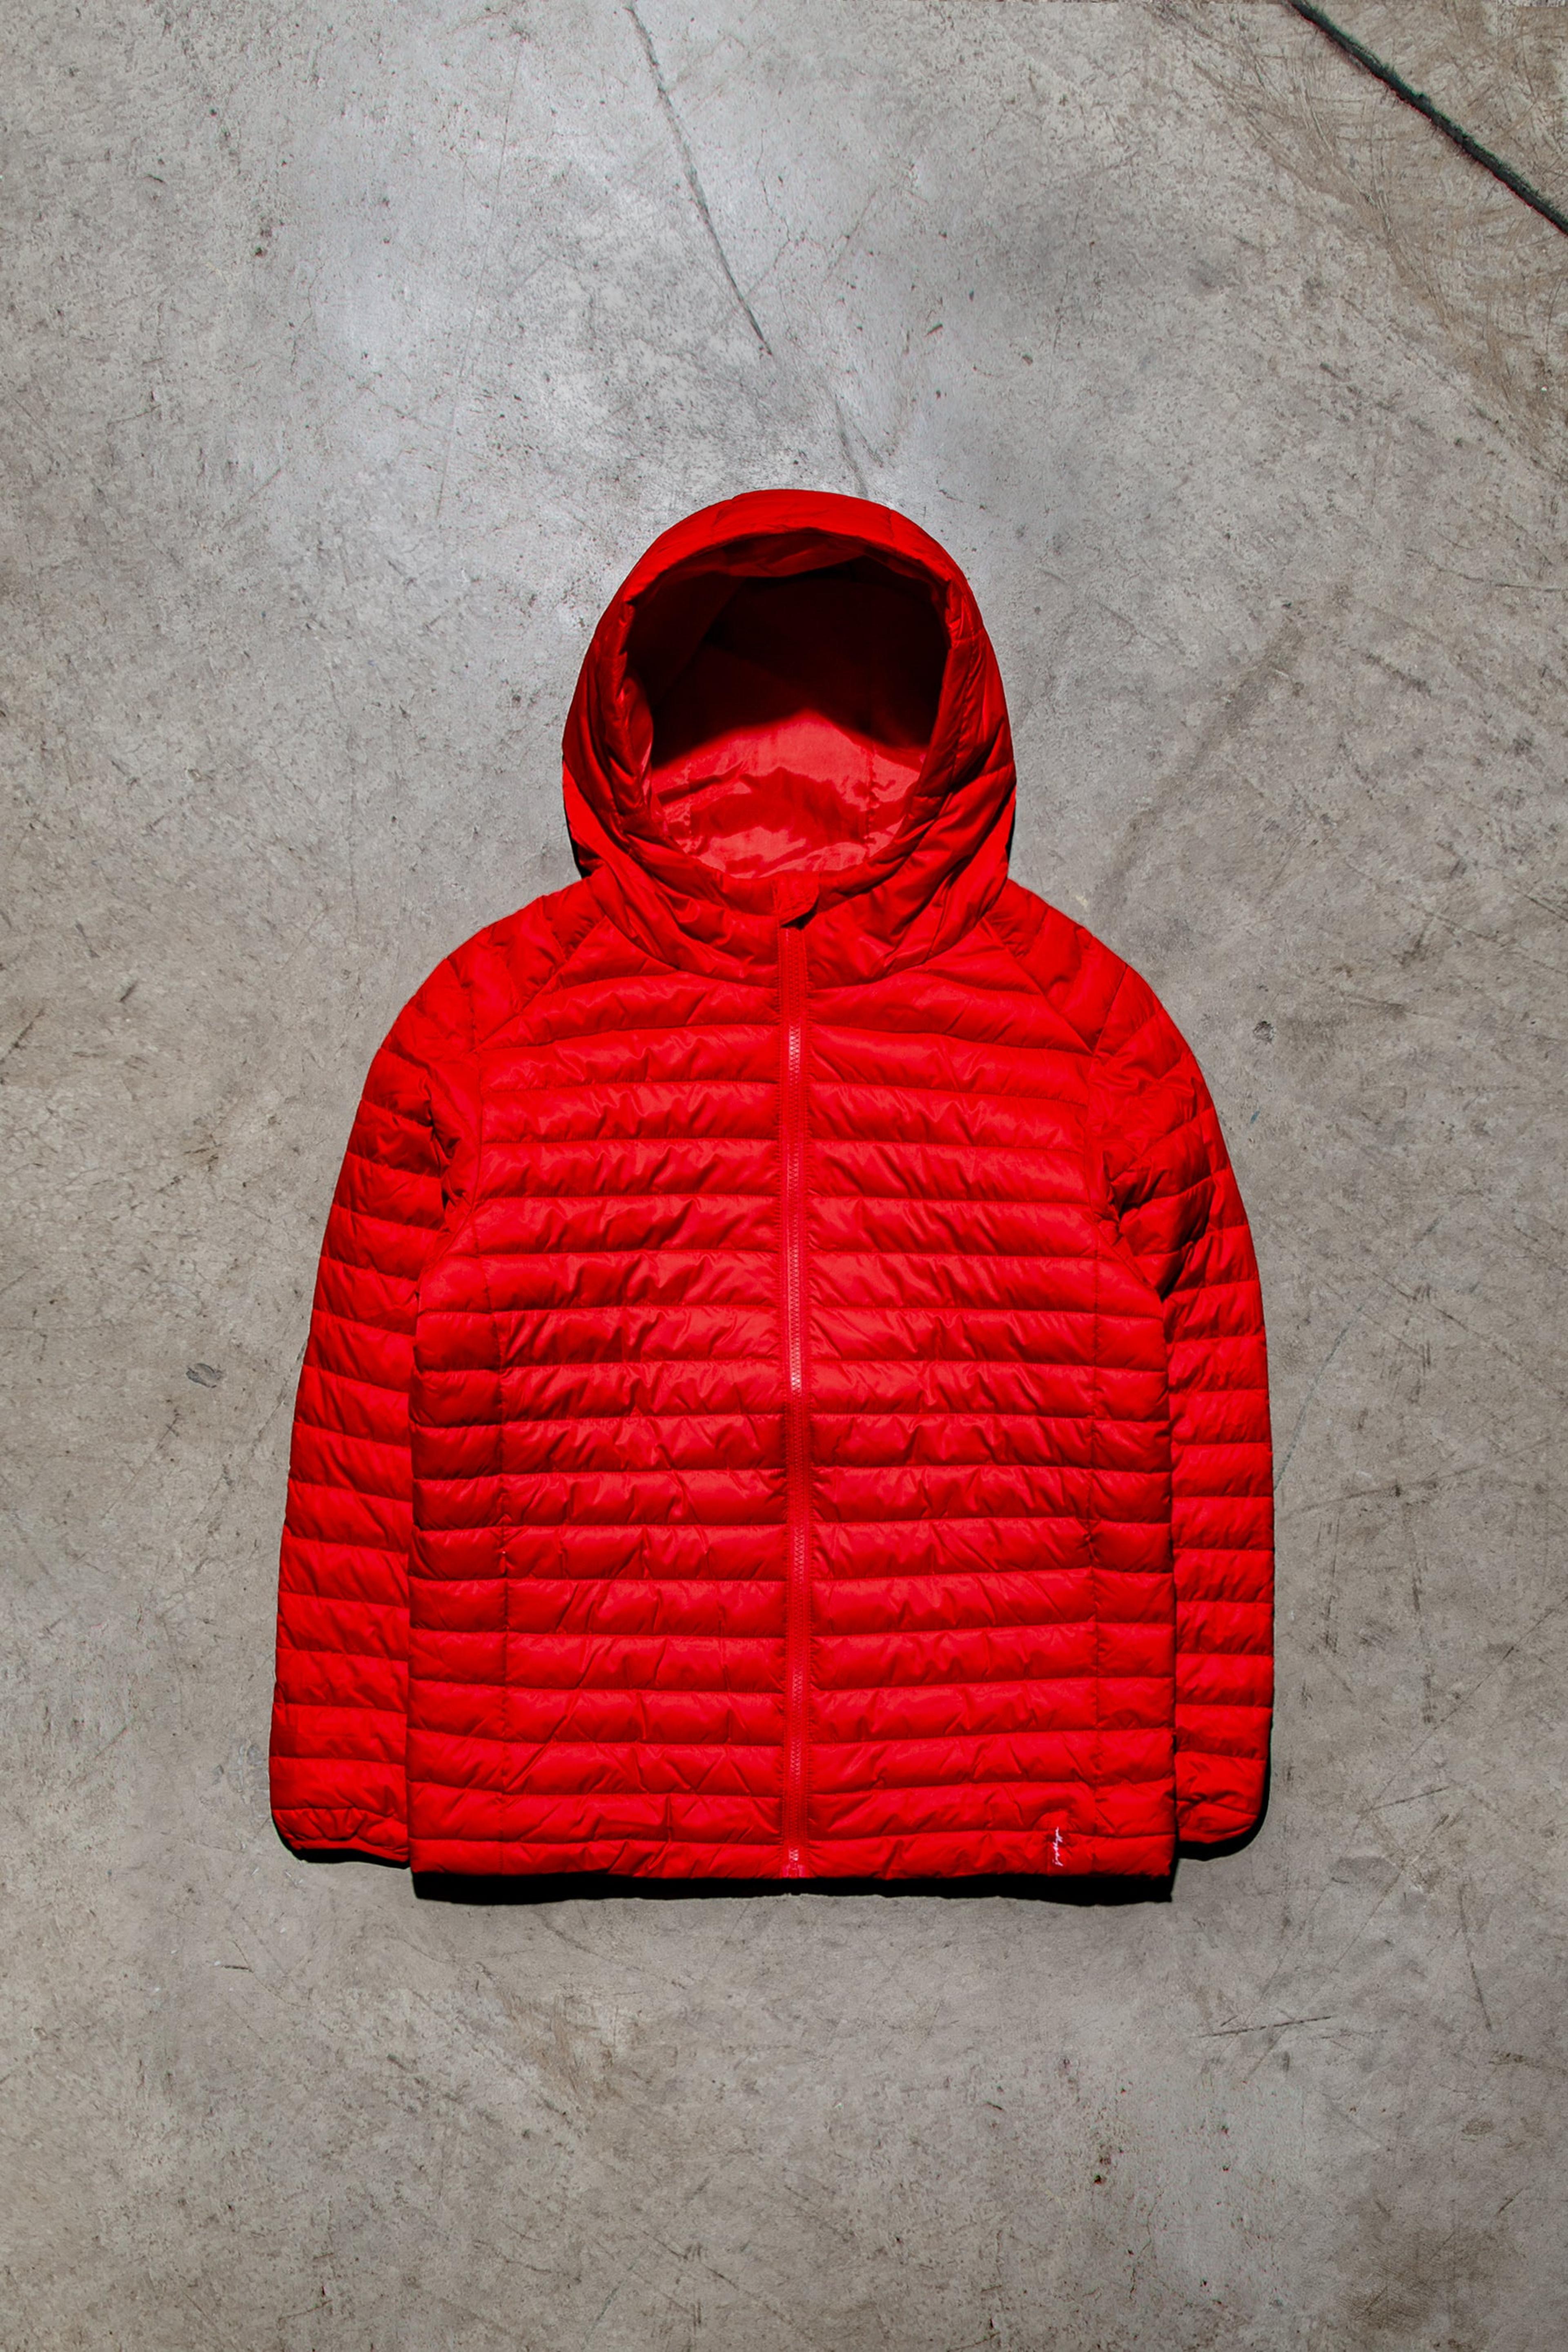 Alternate View 5 of HYPE RED MEN'S PUFFER JACKET